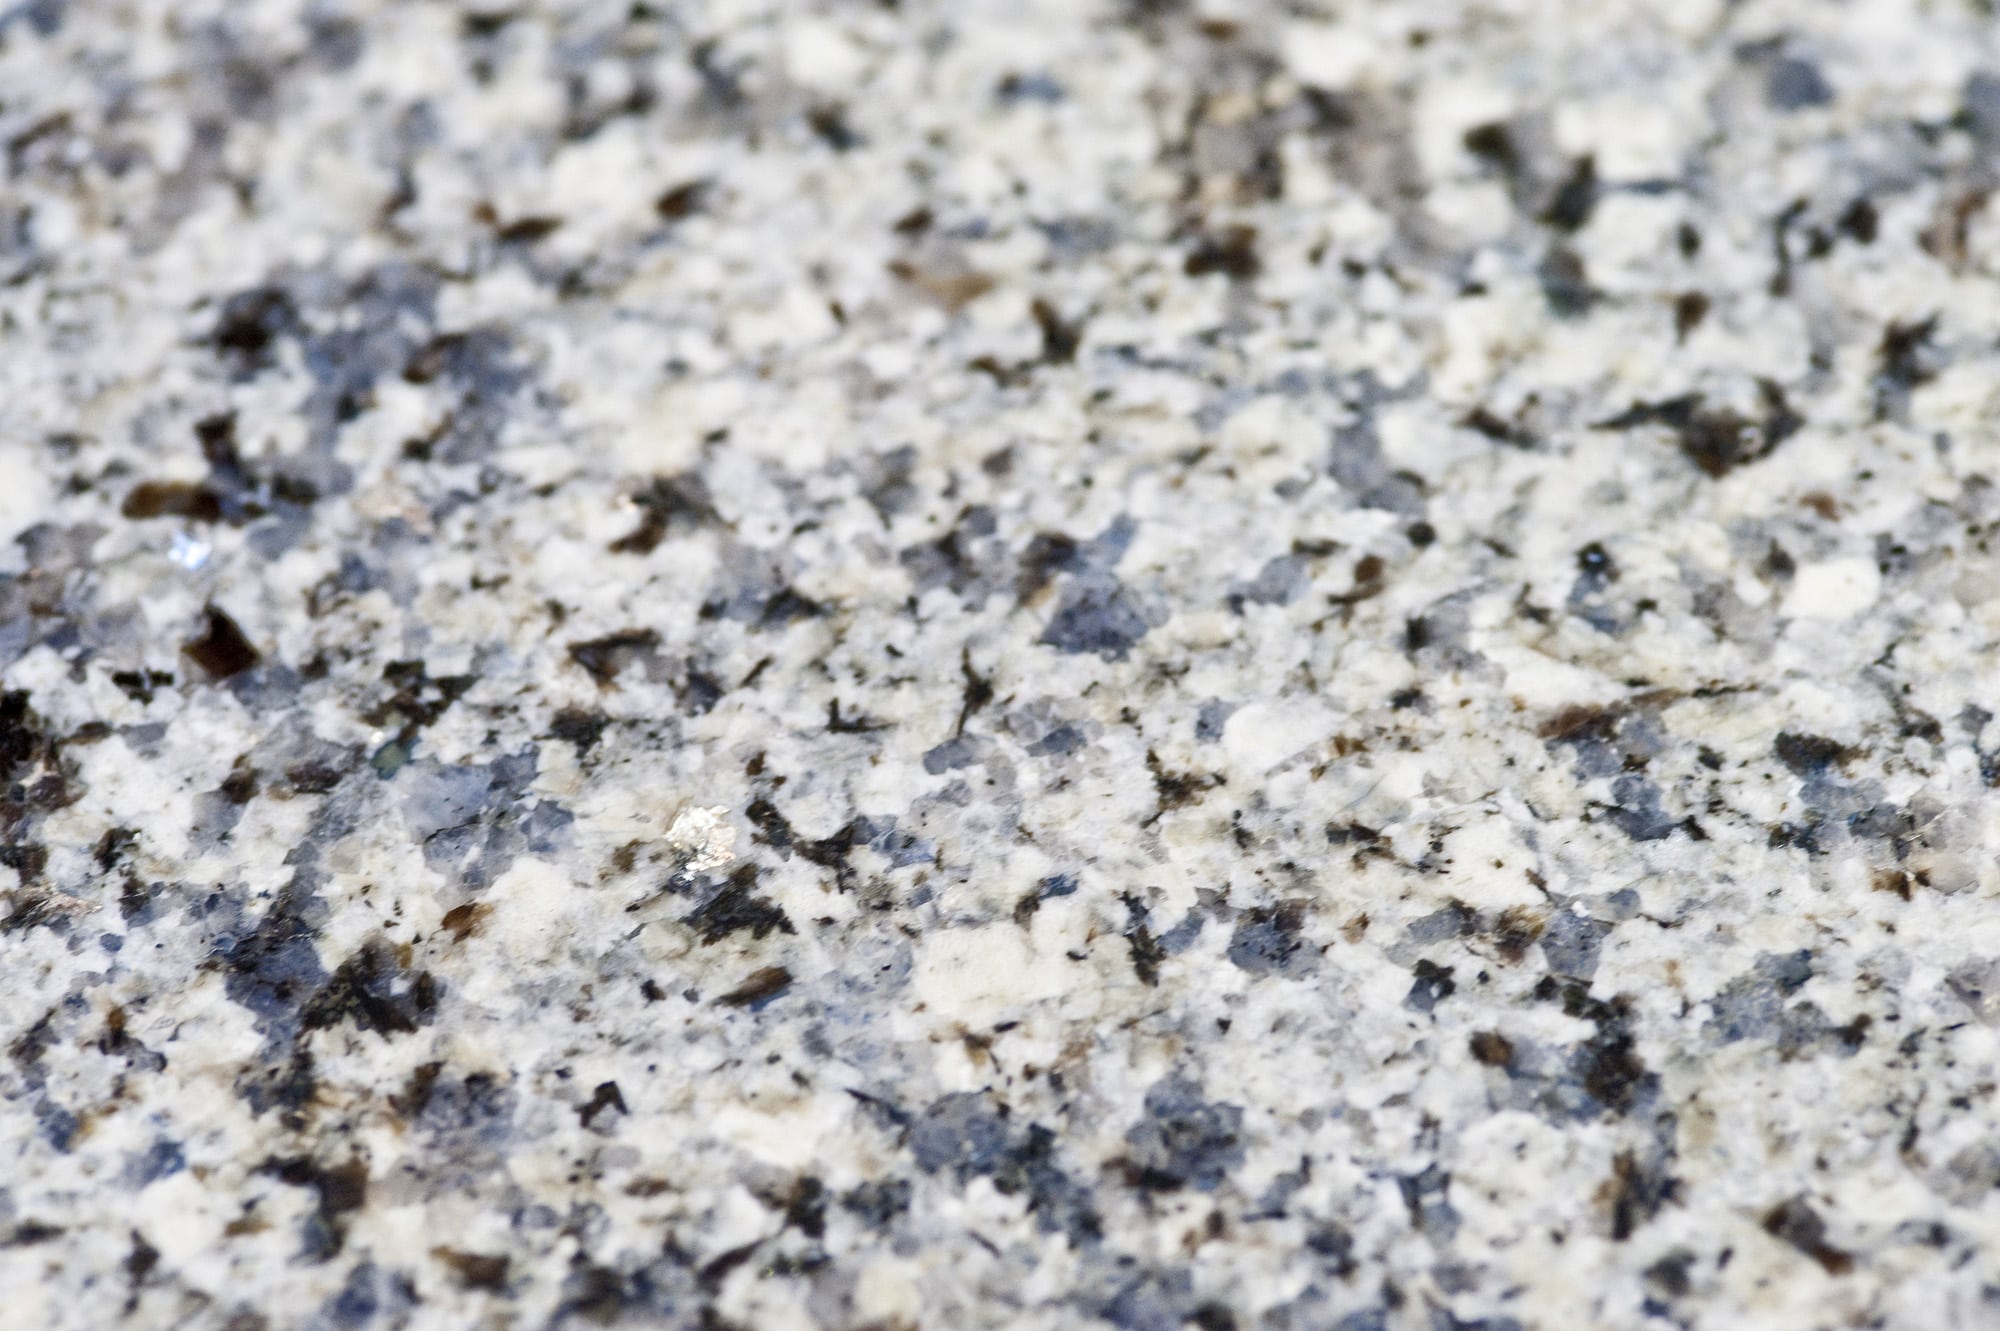 azul-platino-granite-east-grinstead-122106-a-surface-detail-min